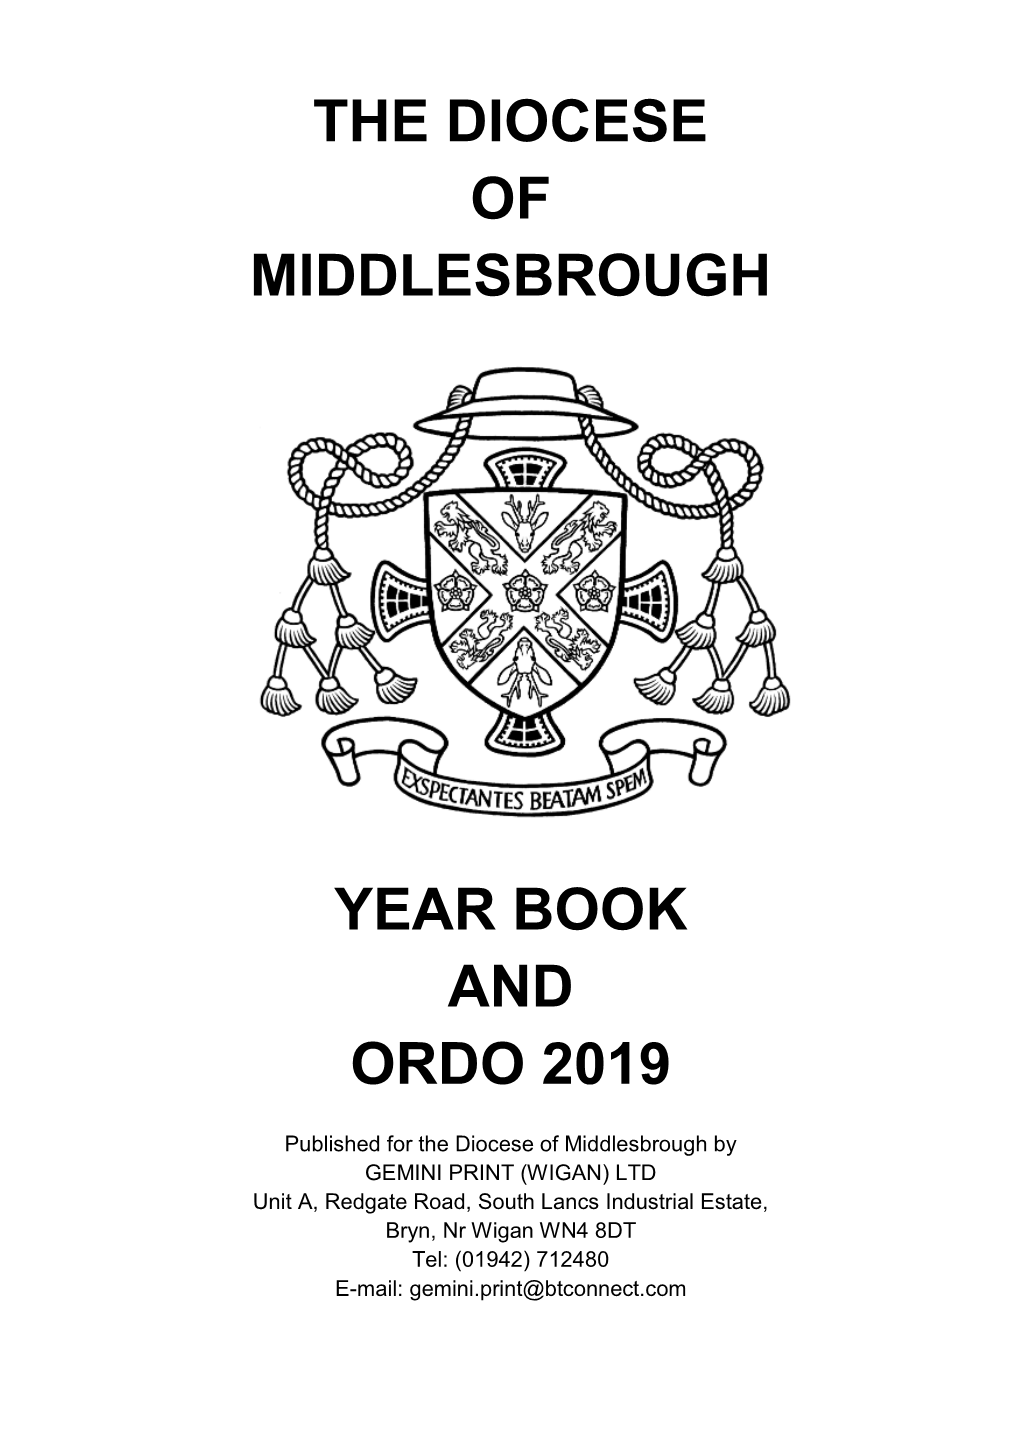 The Diocese of Middlesbrough Year Book and Ordo 2019